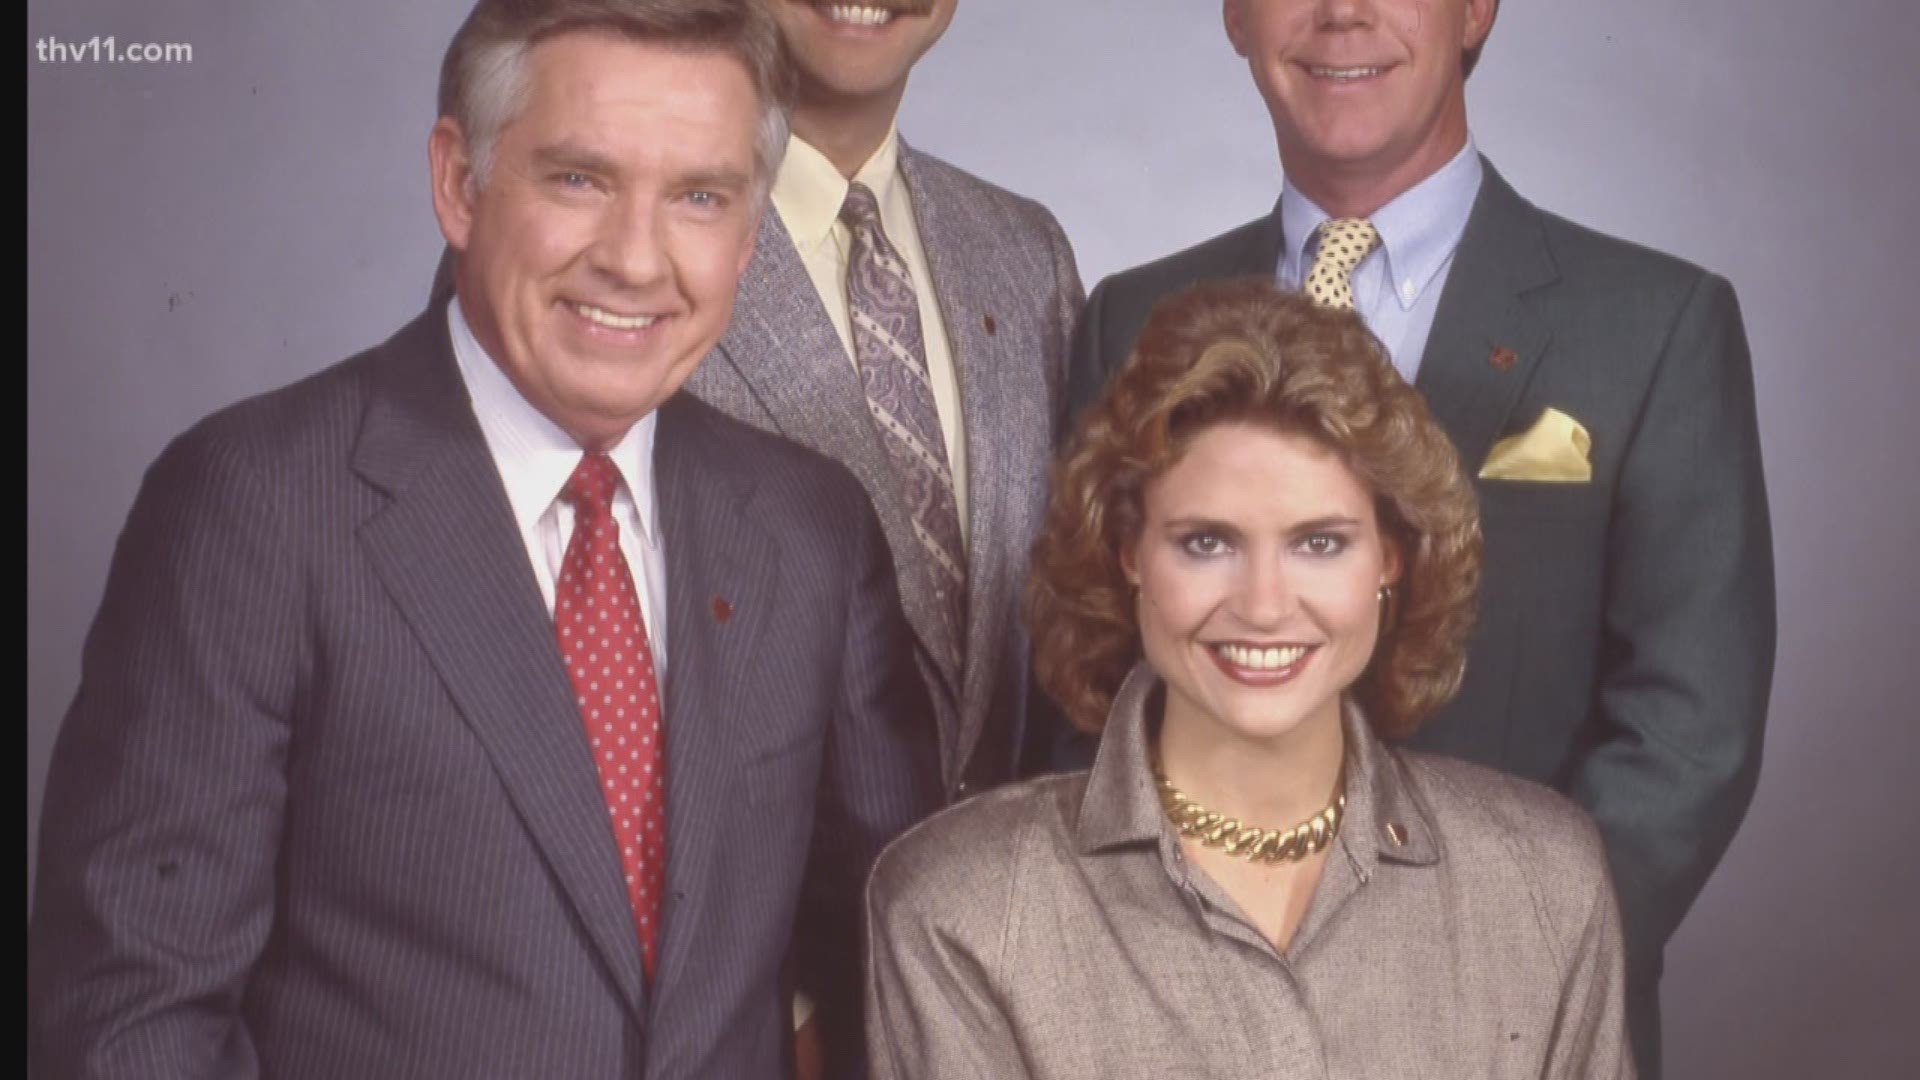 Murphy Brown is making a comeback tonight on THV11 nearly 30 years after it originally debuted on Nov. 14, 1988.